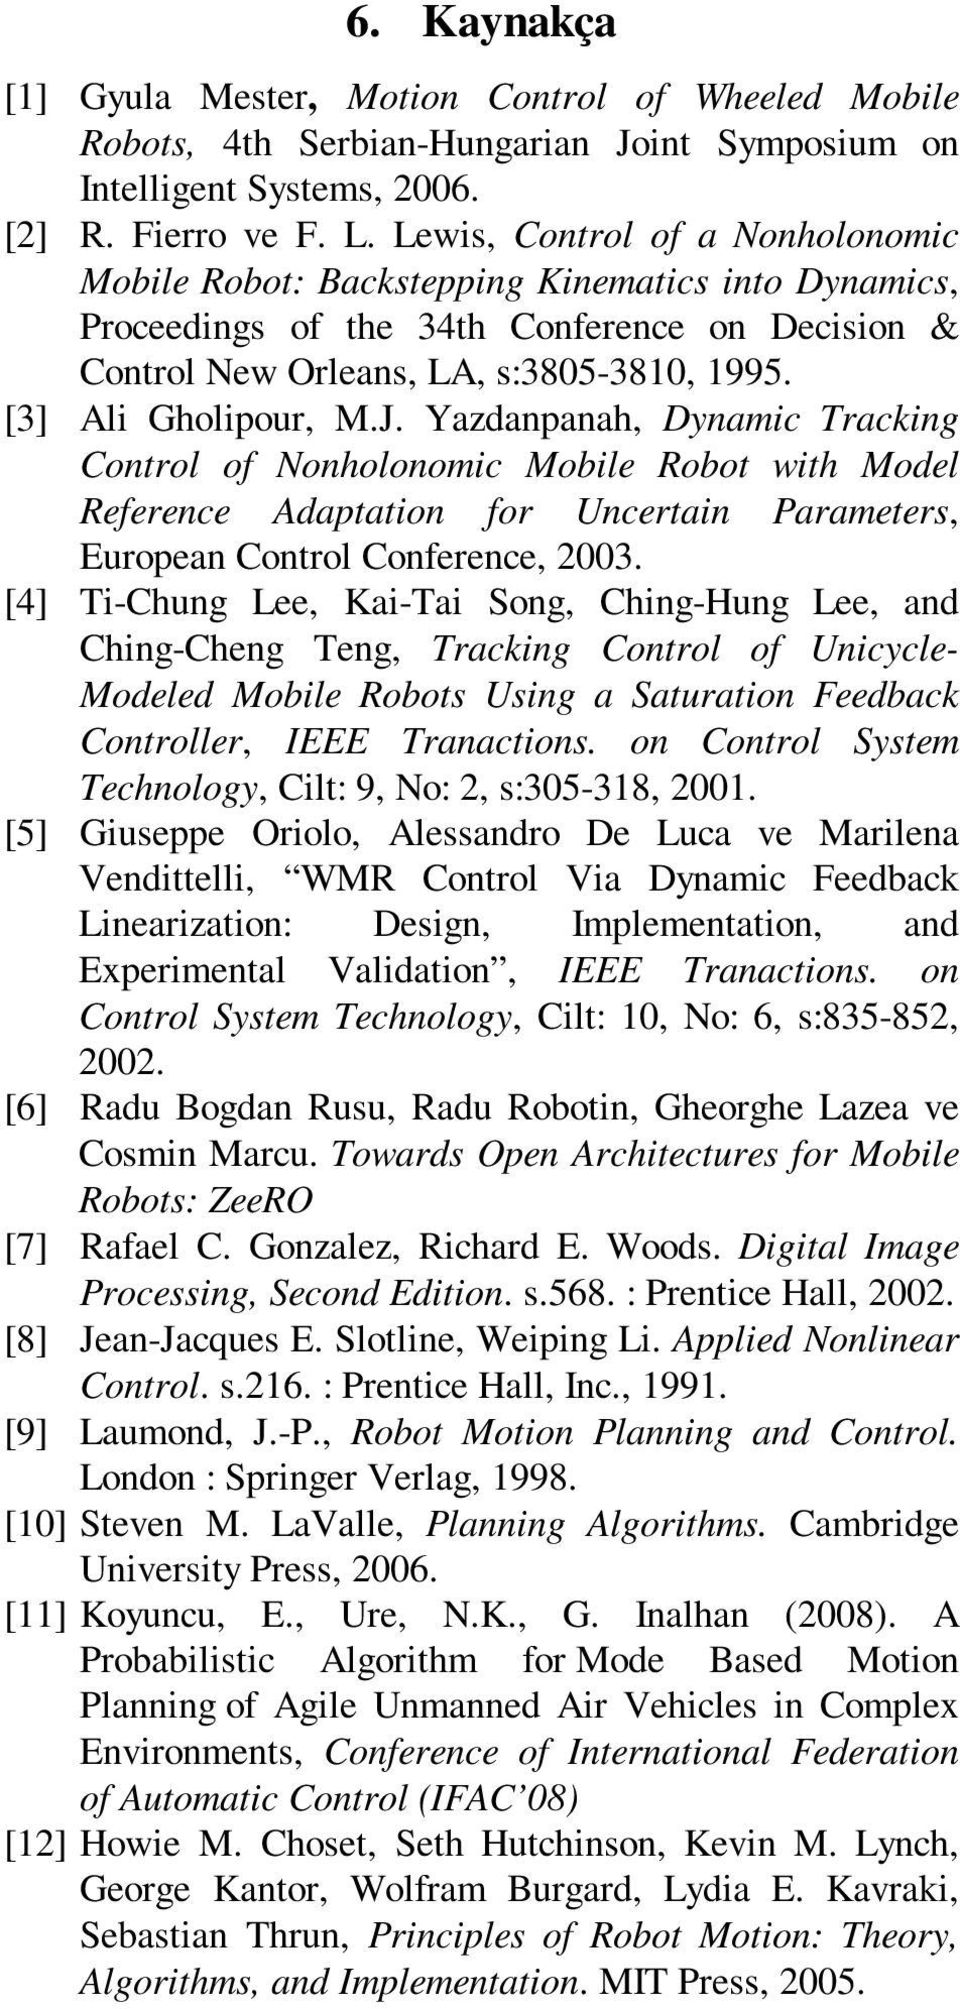 Yazanpanah, Dynamic Tracking Control of Nonholonomic Mobile obot with Moel eference Aaptation for Uncertain Parameters, European Control Conference, 2003.